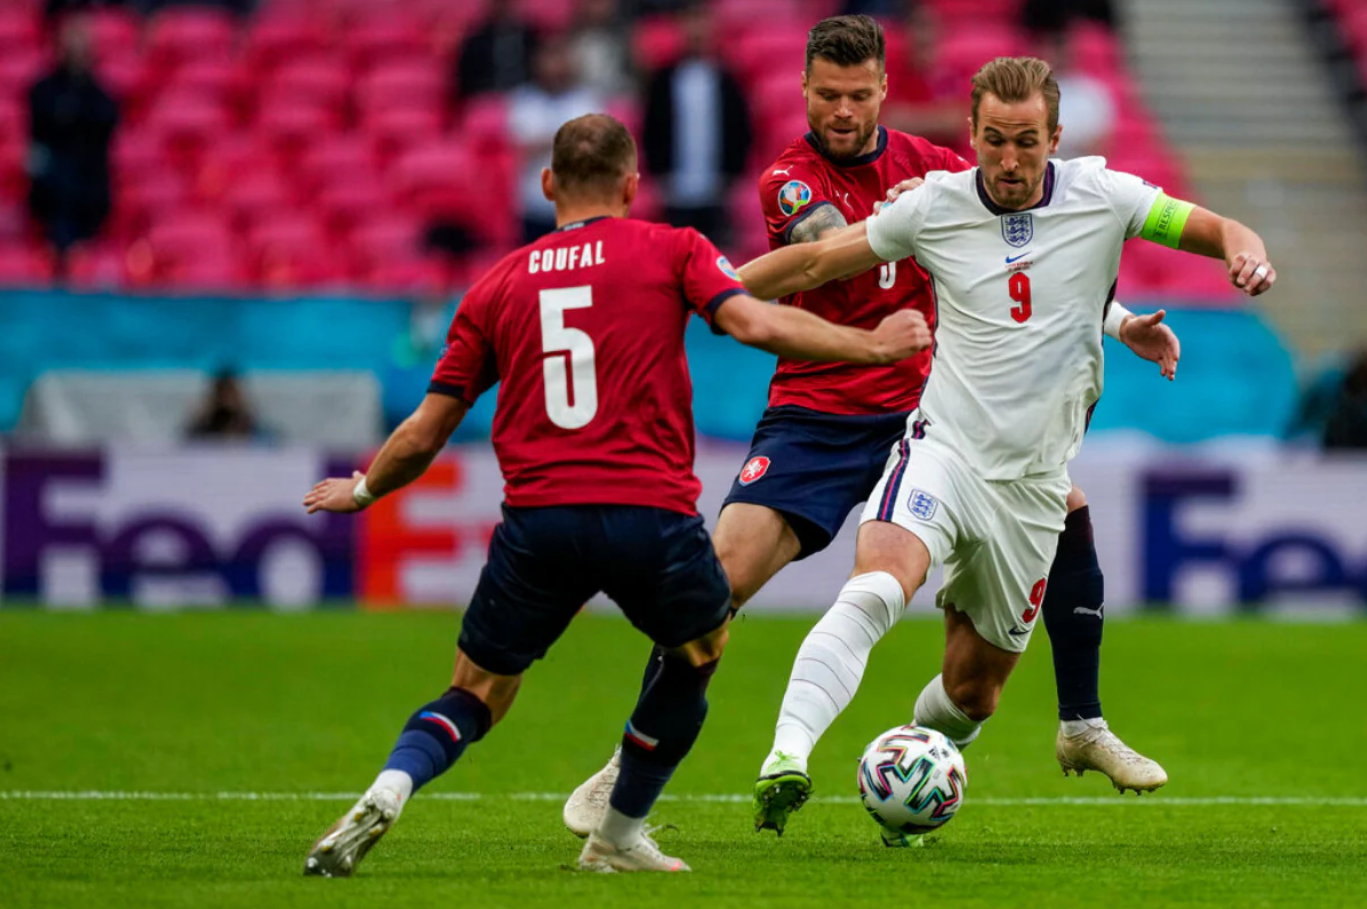 England defeated Czech Republic 1-0 in a an uneventful match. Both teams qualify to the Round of 16, but questions remain regarding these teams